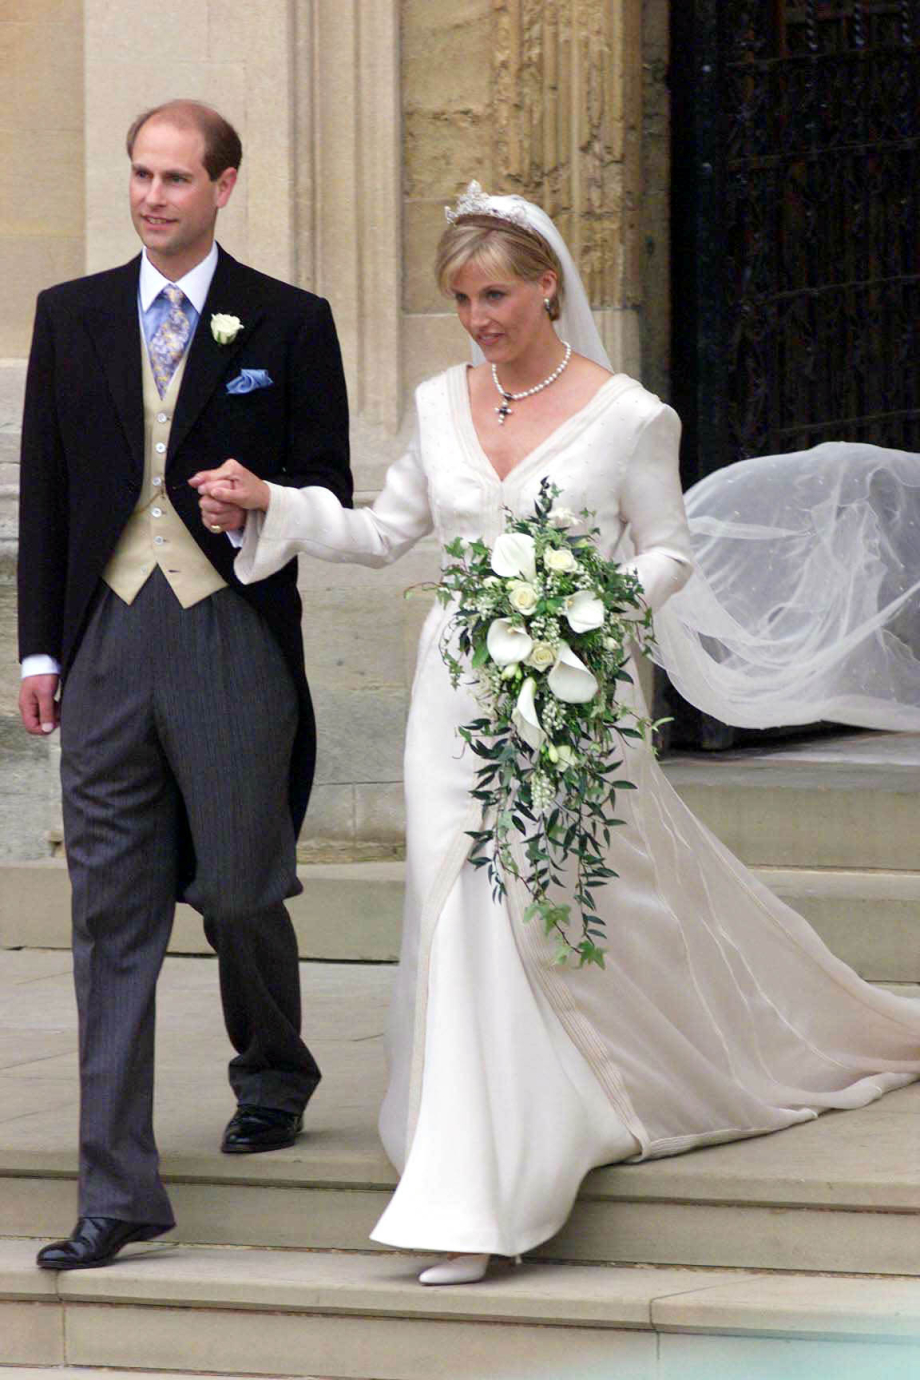 The Countess of Wessex's Wedding Dress